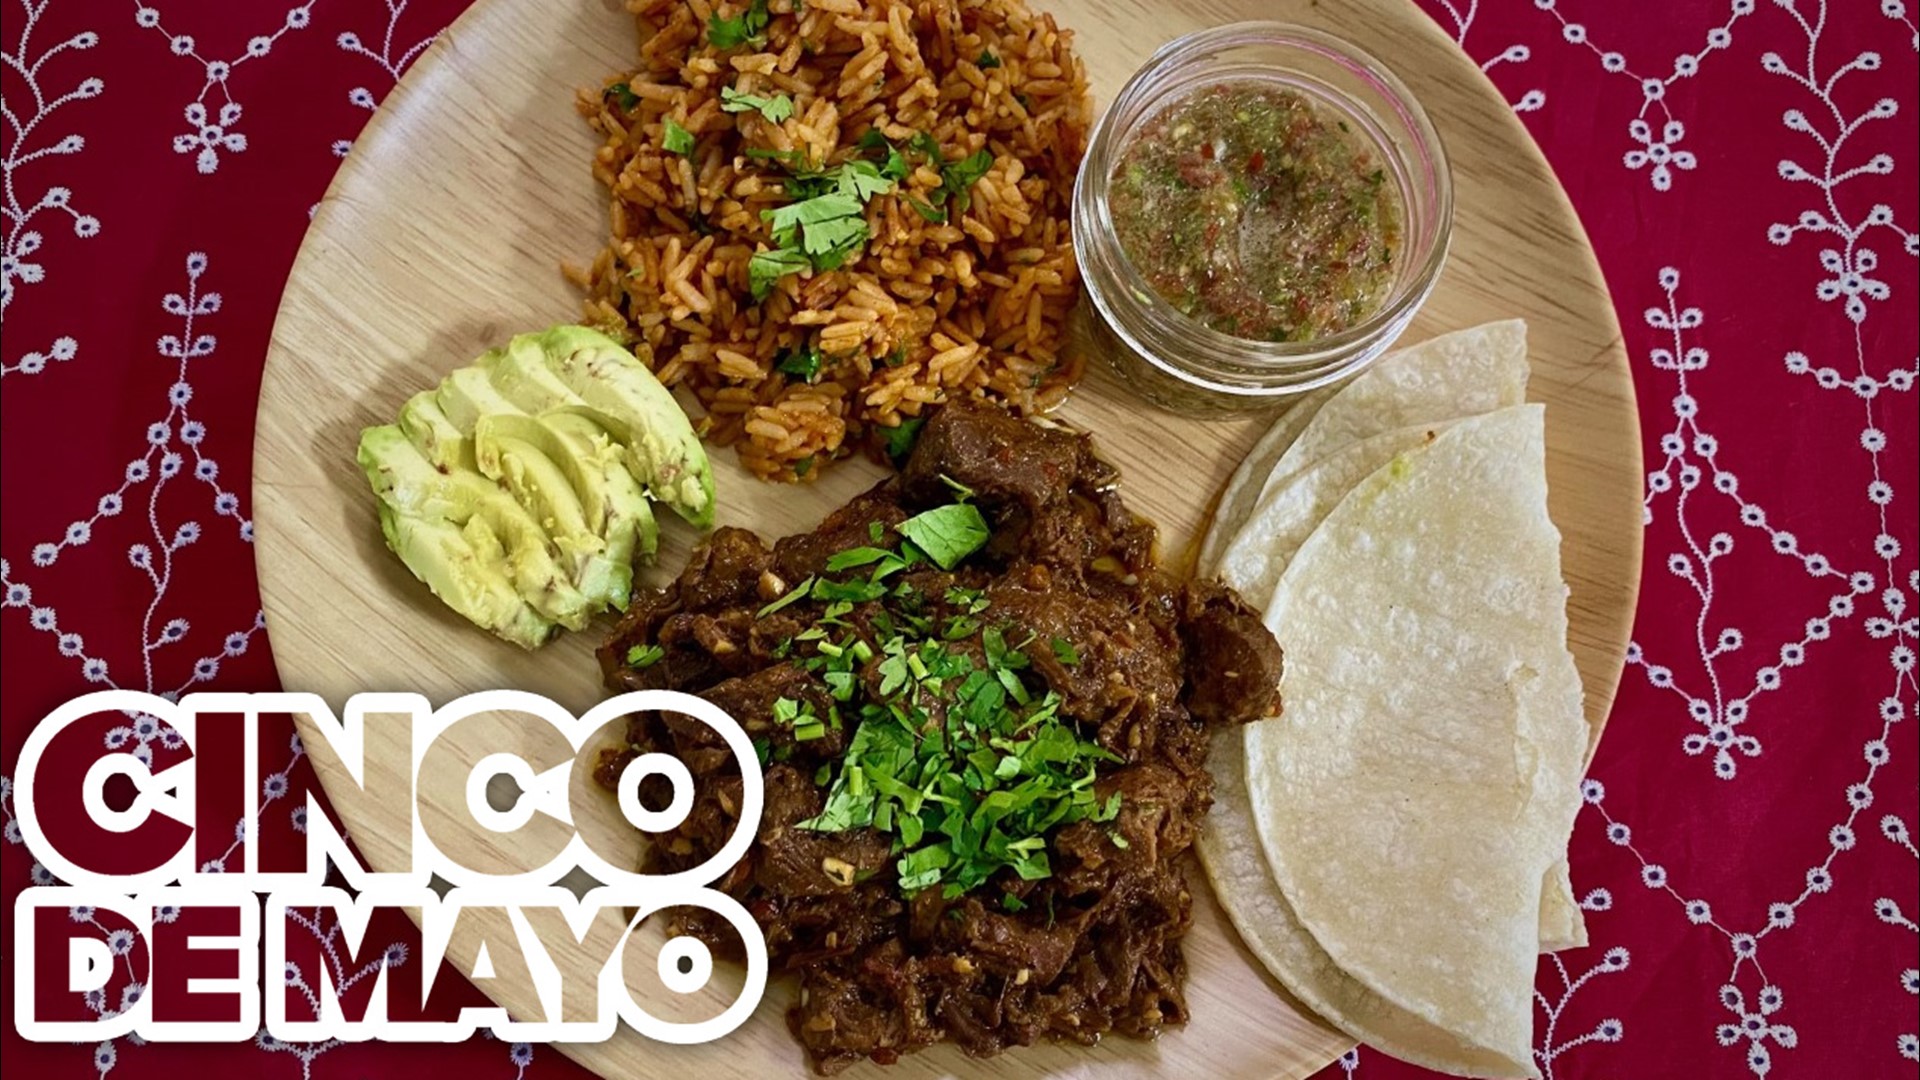 Not sure what to make for Cinco de Mayo? Chef Kevin's got you covered!